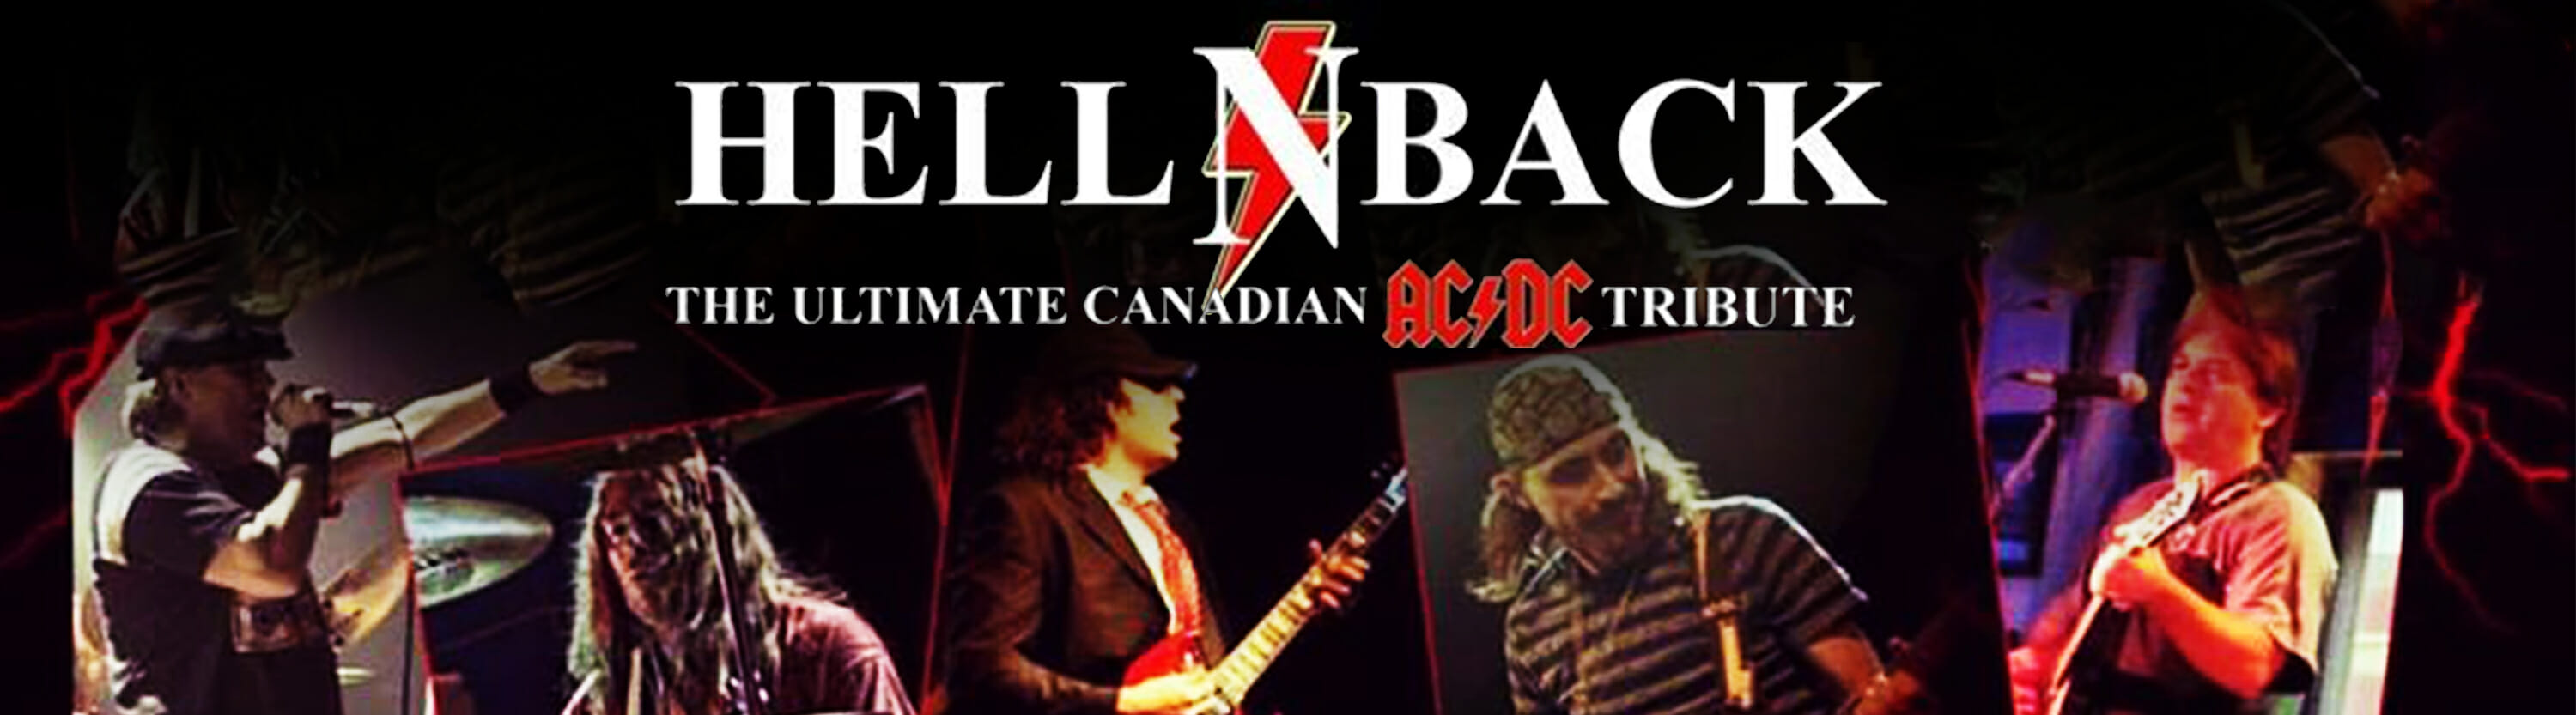 Hell n Back<br>ACDC Tribute